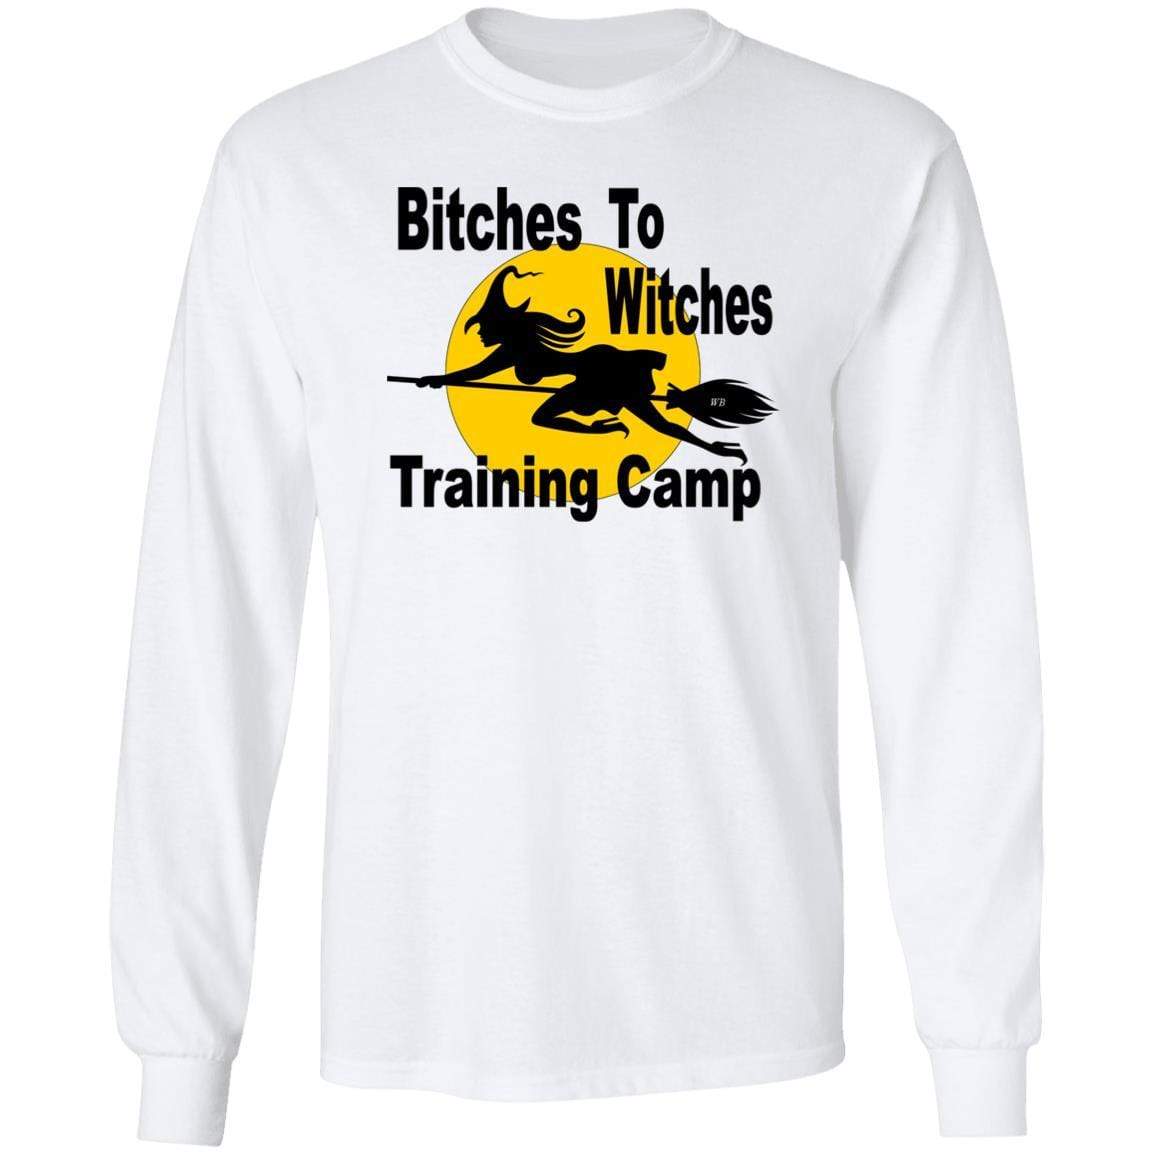 T-Shirts White / S WineyBitches.Co "Bitches To Witches Training Camp" LS Ultra Cotton T-Shirt WineyBitchesCo